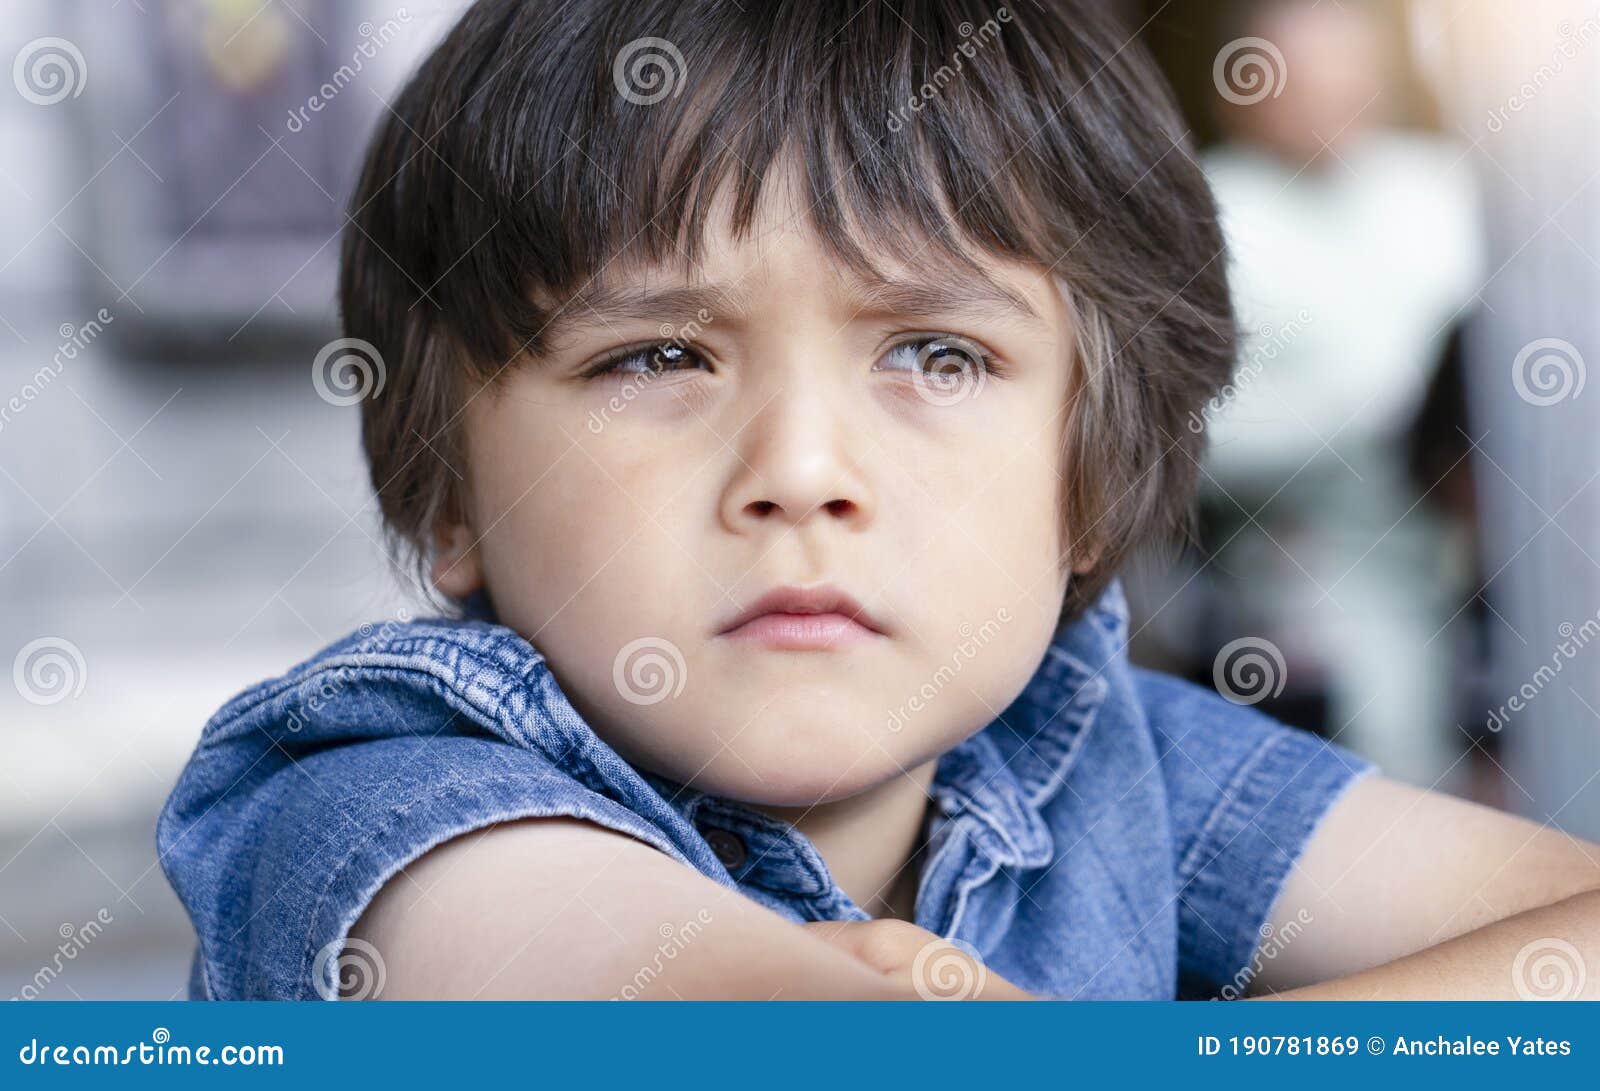 Emotional Portrait of Unhappy Toddler Boy with Sad Face, Upset Boy ...